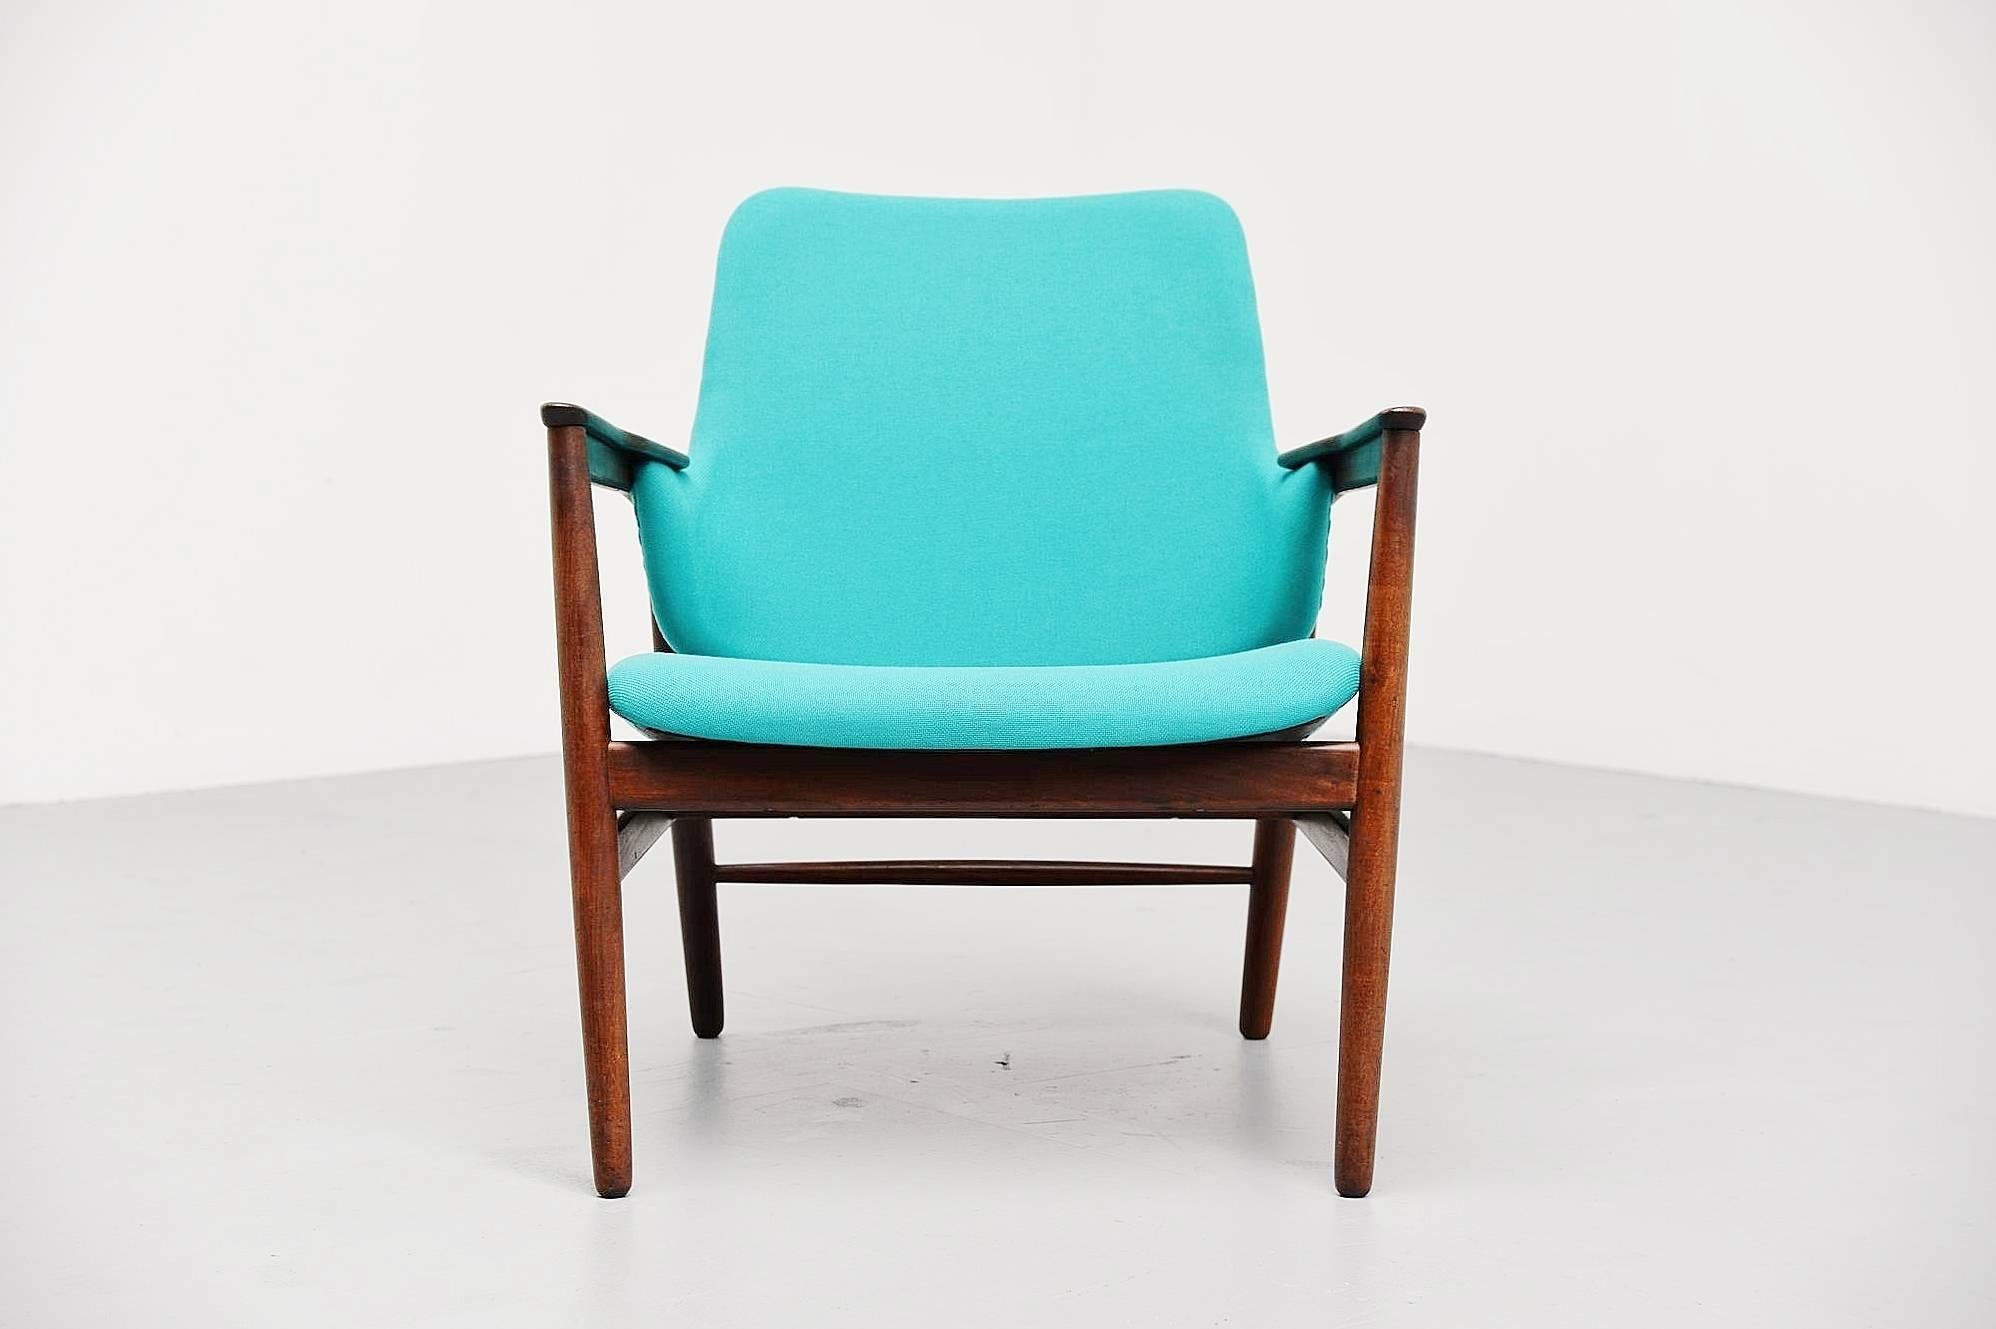 Super rare easy chair designed by Ib Kofod Larsen, manufactured by Christensen & Larsen Cabinetmakers, Denmark, 1953. This chair has a solid teak frame and is newly upholstered with turquoise upholstery. The chair is a real beauty, typical Ib Kofod